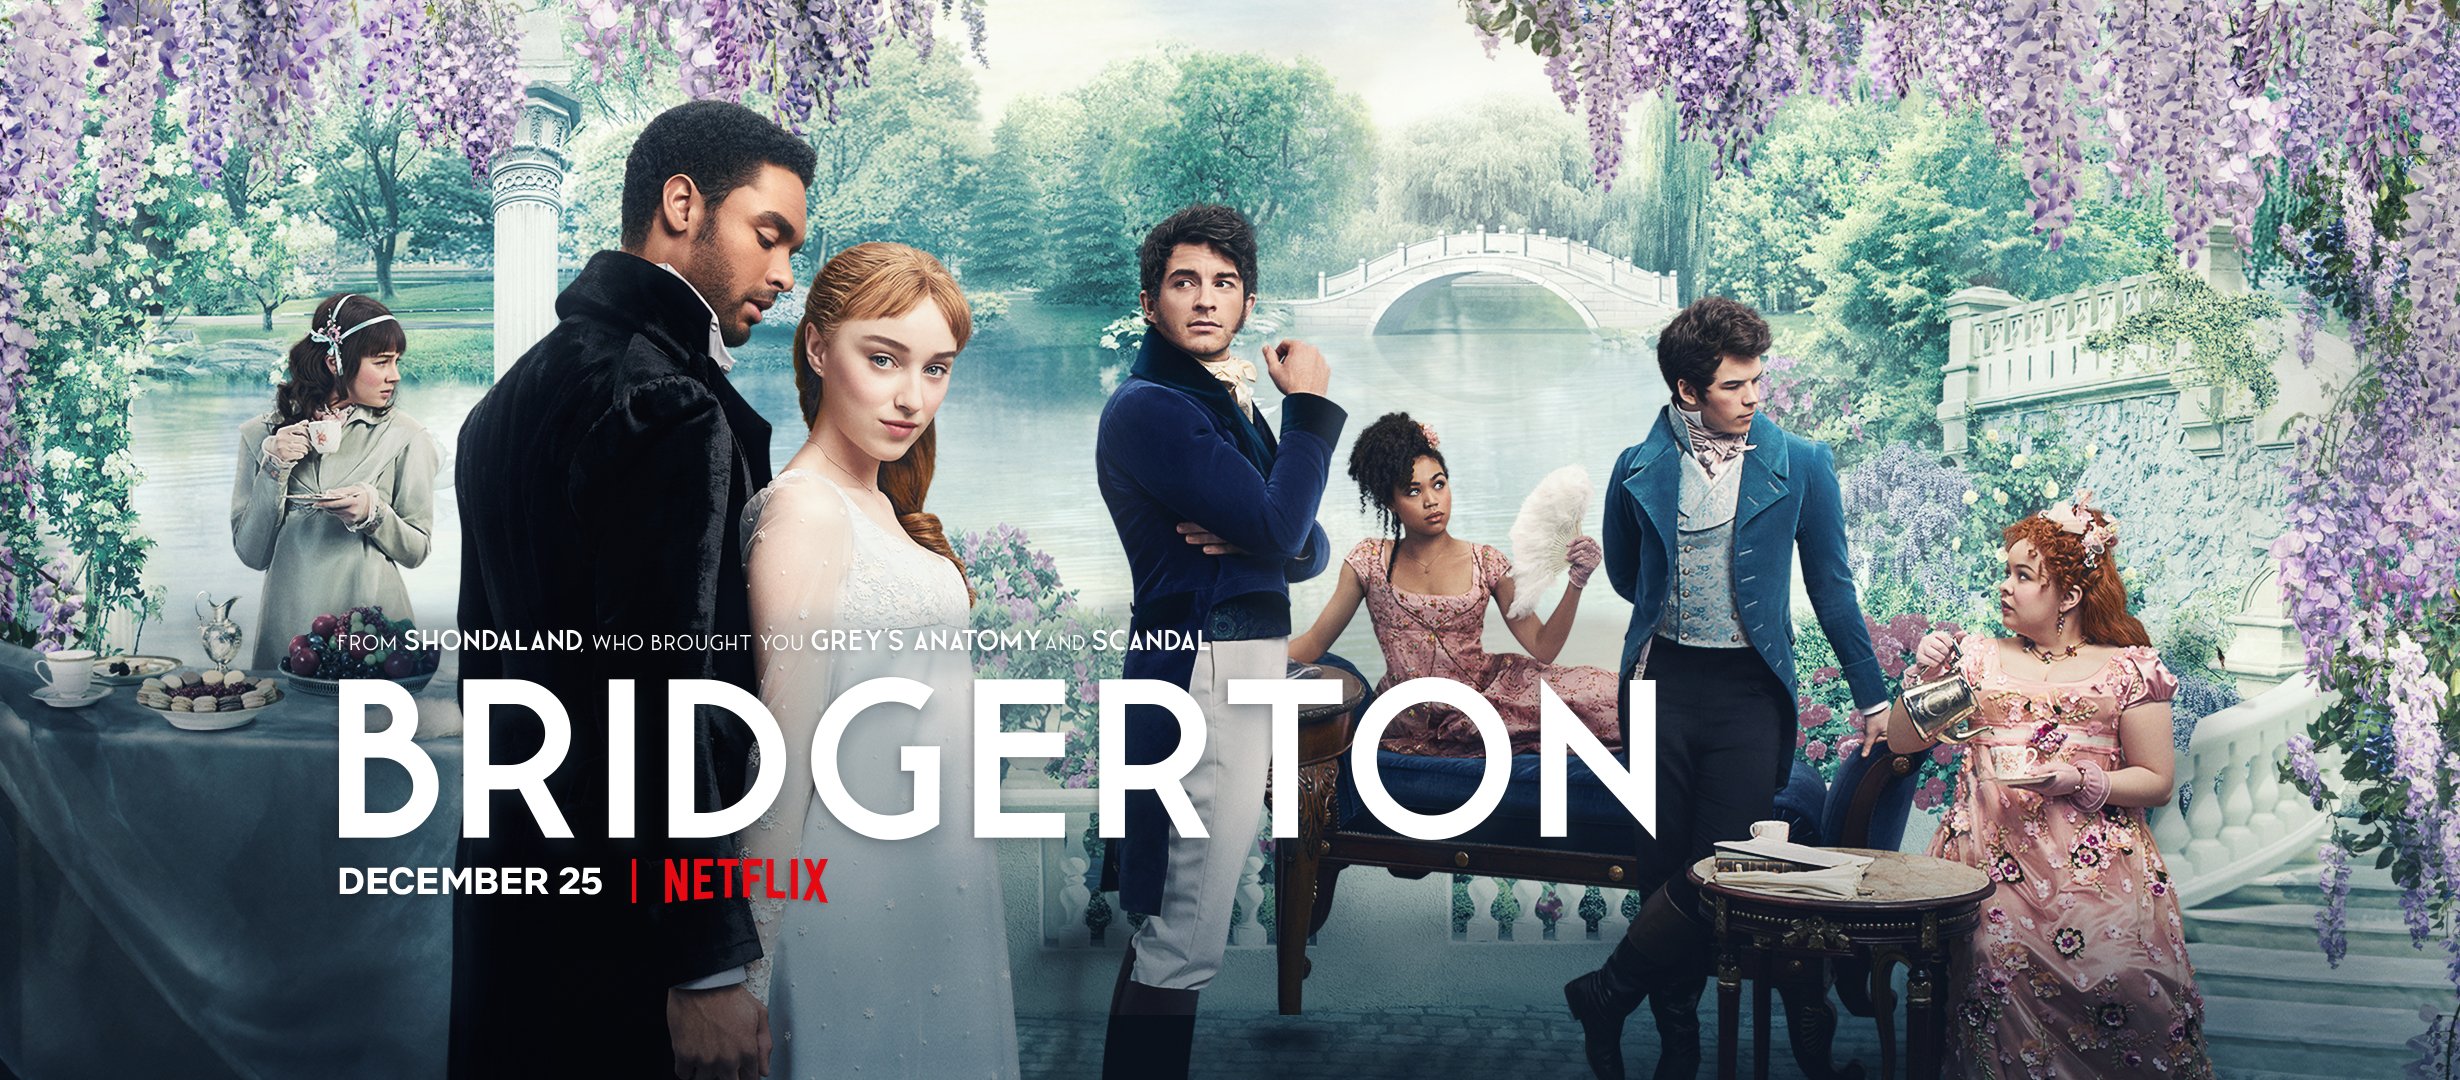 Netflix's Bridgerton promotional image featuring all these hot weirdos lounging around under a floral canopy.